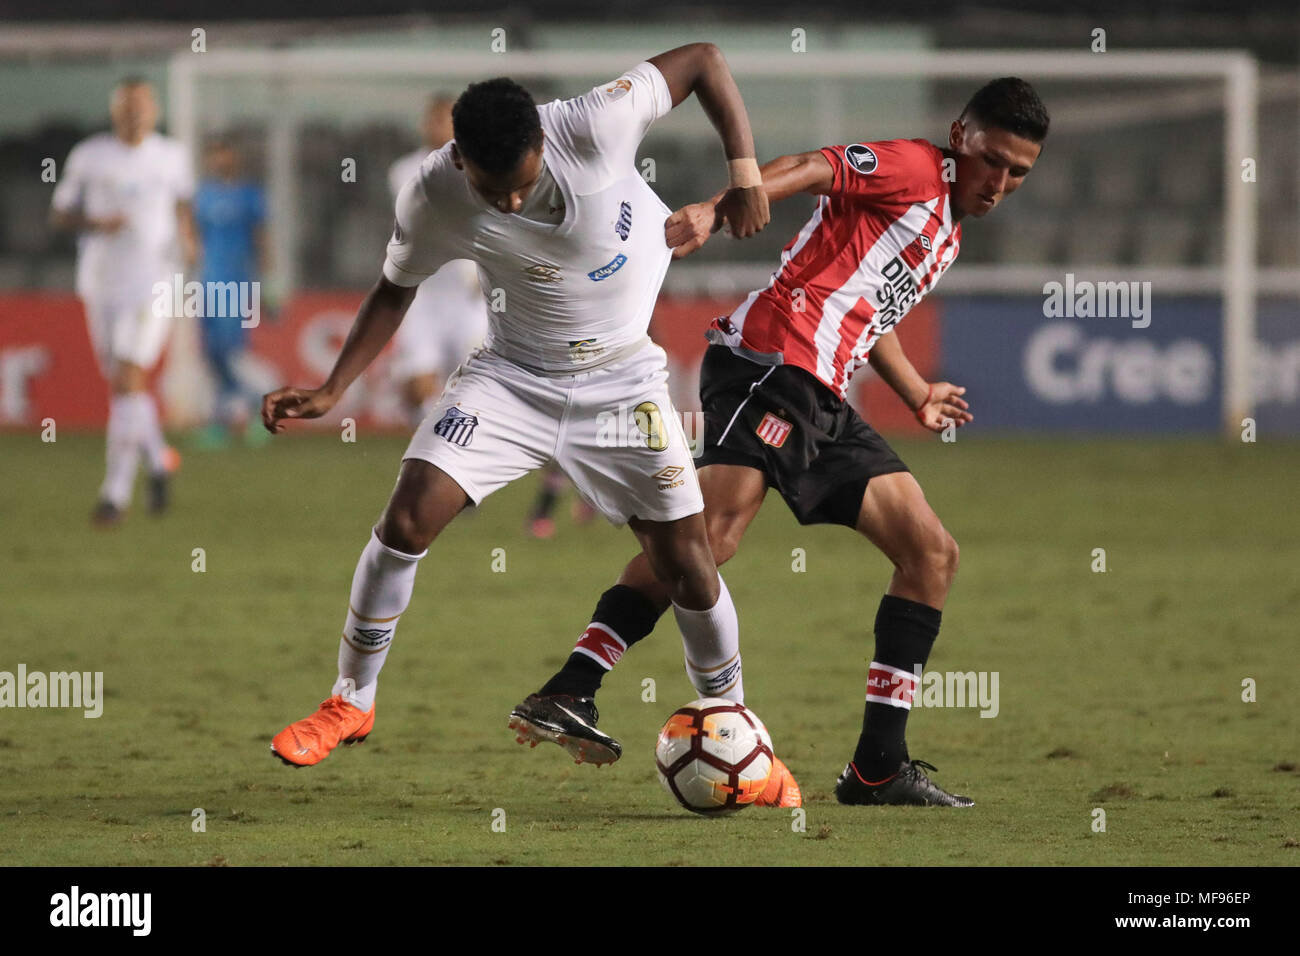 Santos, Brazil. 24th Apr, 2018. Rodrygo and Gomez during the match between Santos and Estudiantes (Argentina) held at Vila Belmiro Stadium in Santos, SP. The match is valid for the 4th round of Group 6 of the 2018 Copa Libertadores. Credit: Ricardo Moreira/FotoArena/Alamy Live News Stock Photo